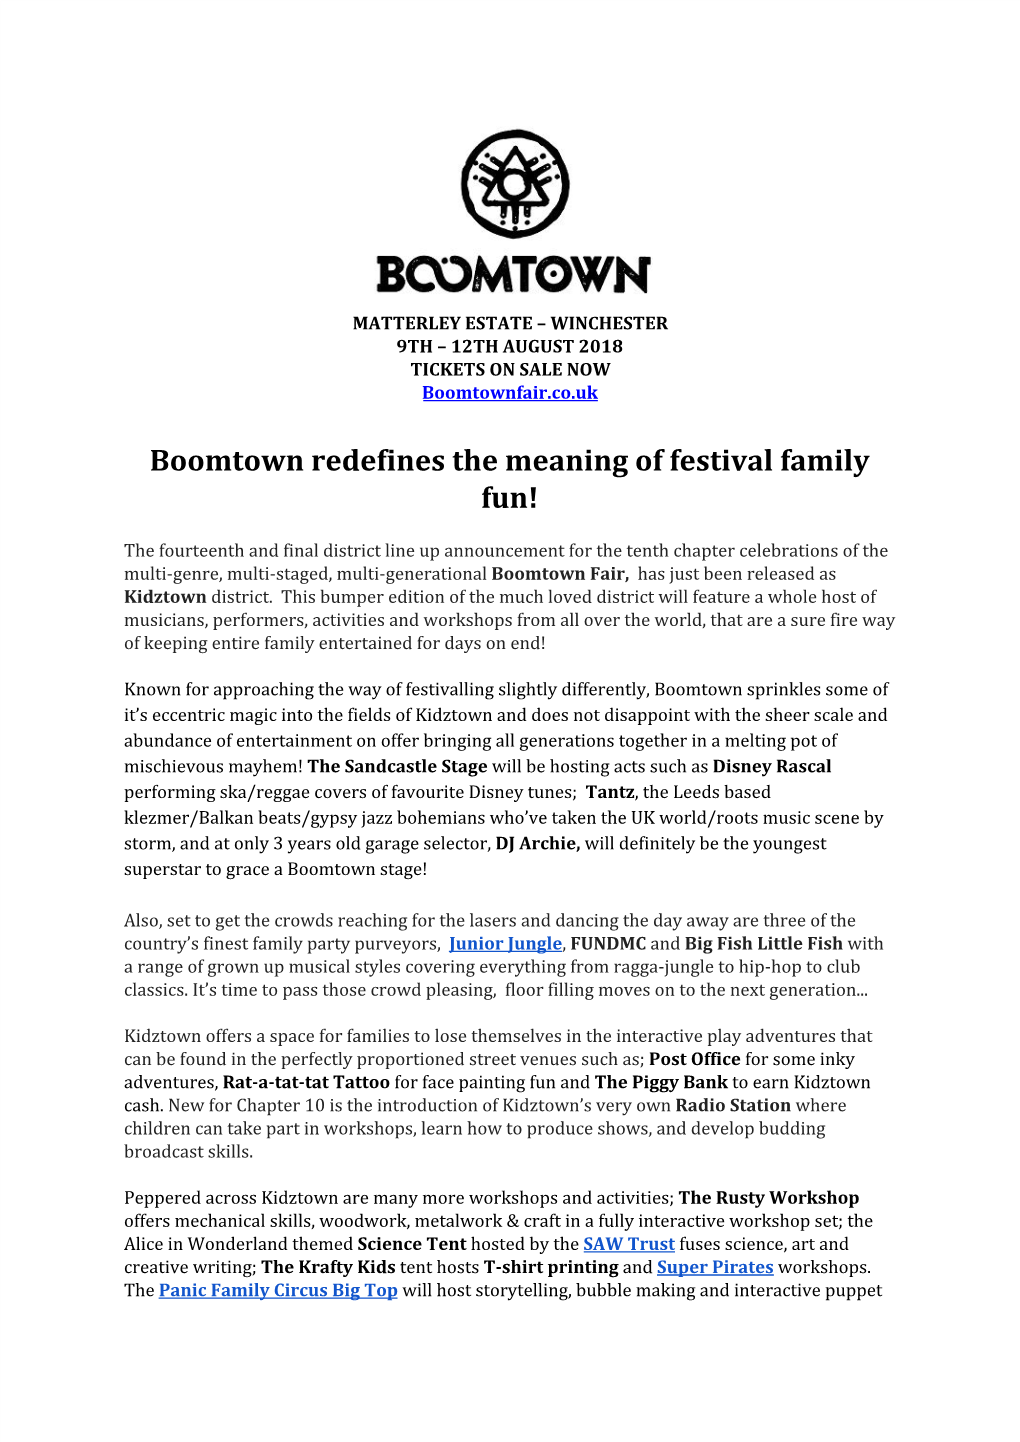 Boomtown Redefines the Meaning of Festival Family Fun!